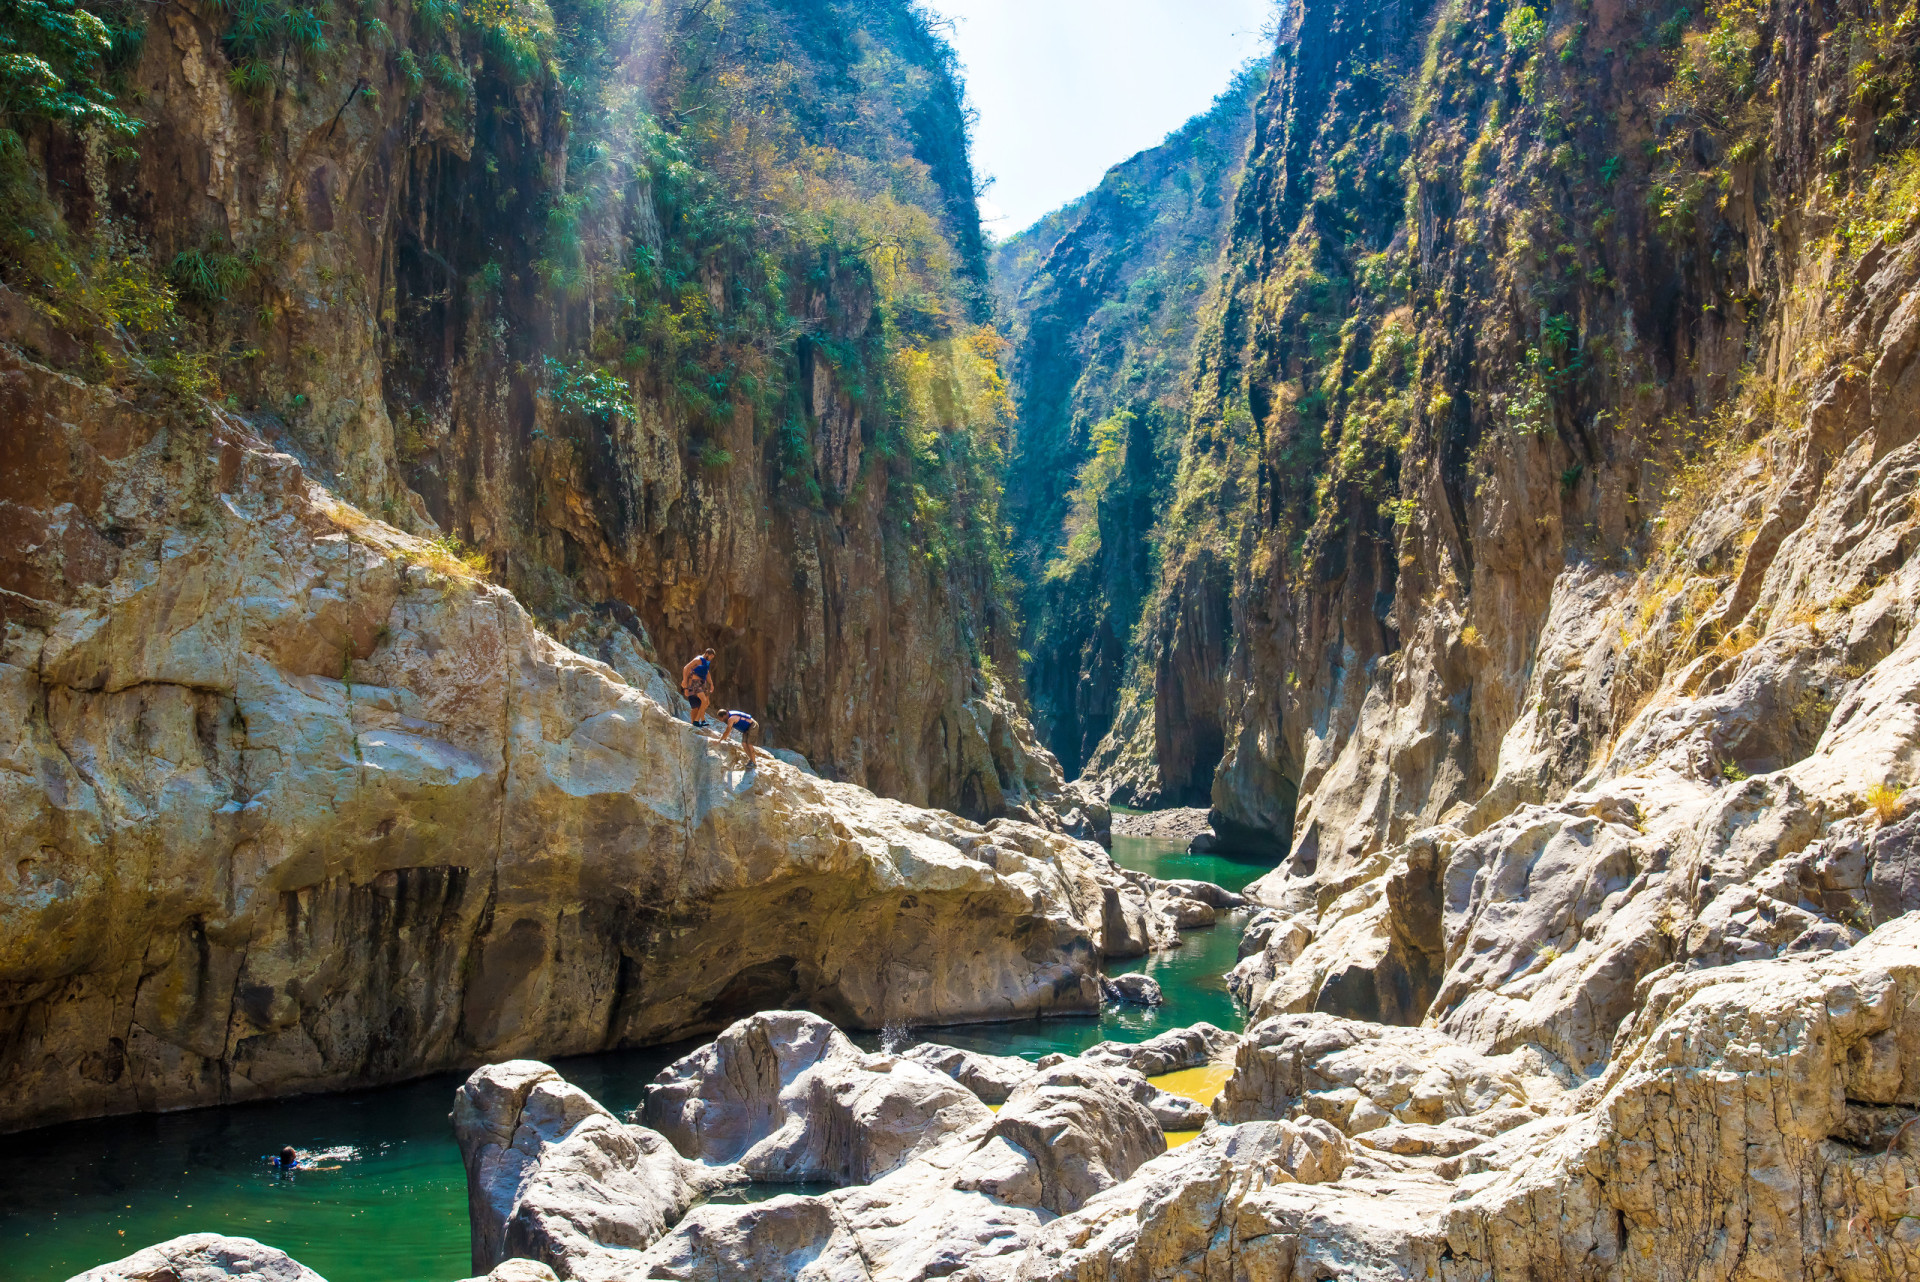 <p>One of the most rewarding adventure experiences in Nicaragua is to trek out to Somoto Canyon National Monument. A rugged and often difficult terrain will test the stamina of the most seasoned of hikers but, hey, the Coco River provides an opportunity to cool down after arriving.</p><p>You may also like:<a href="https://www.starsinsider.com/n/492745?utm_source=msn.com&utm_medium=display&utm_campaign=referral_description&utm_content=627756en-en"> Historical facts you won't believe are true</a></p>